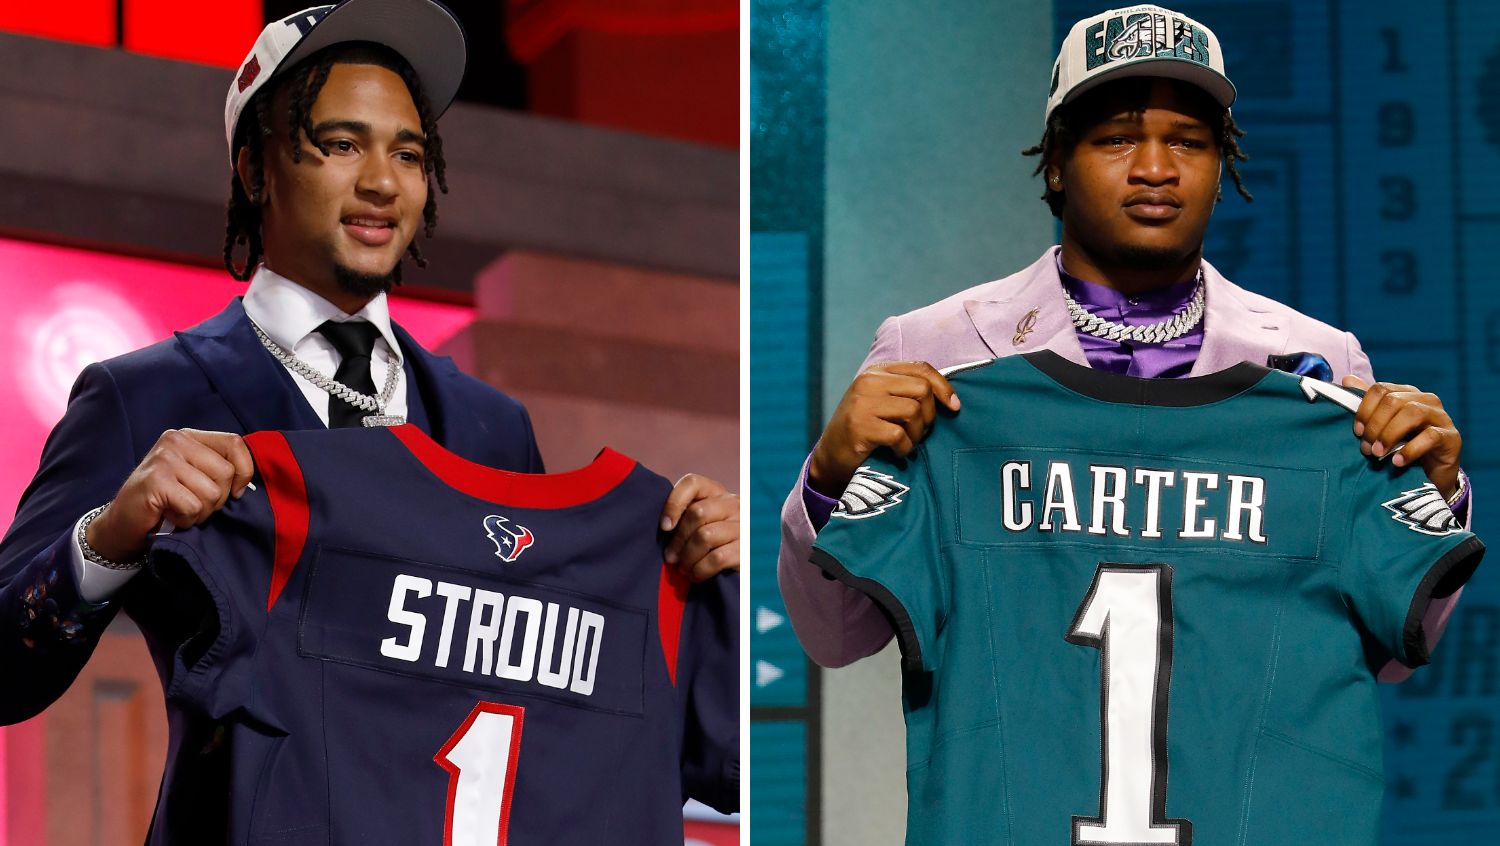 2023 NFL Draft Grades: Biggest Winners & Losers From All 7 Rounds